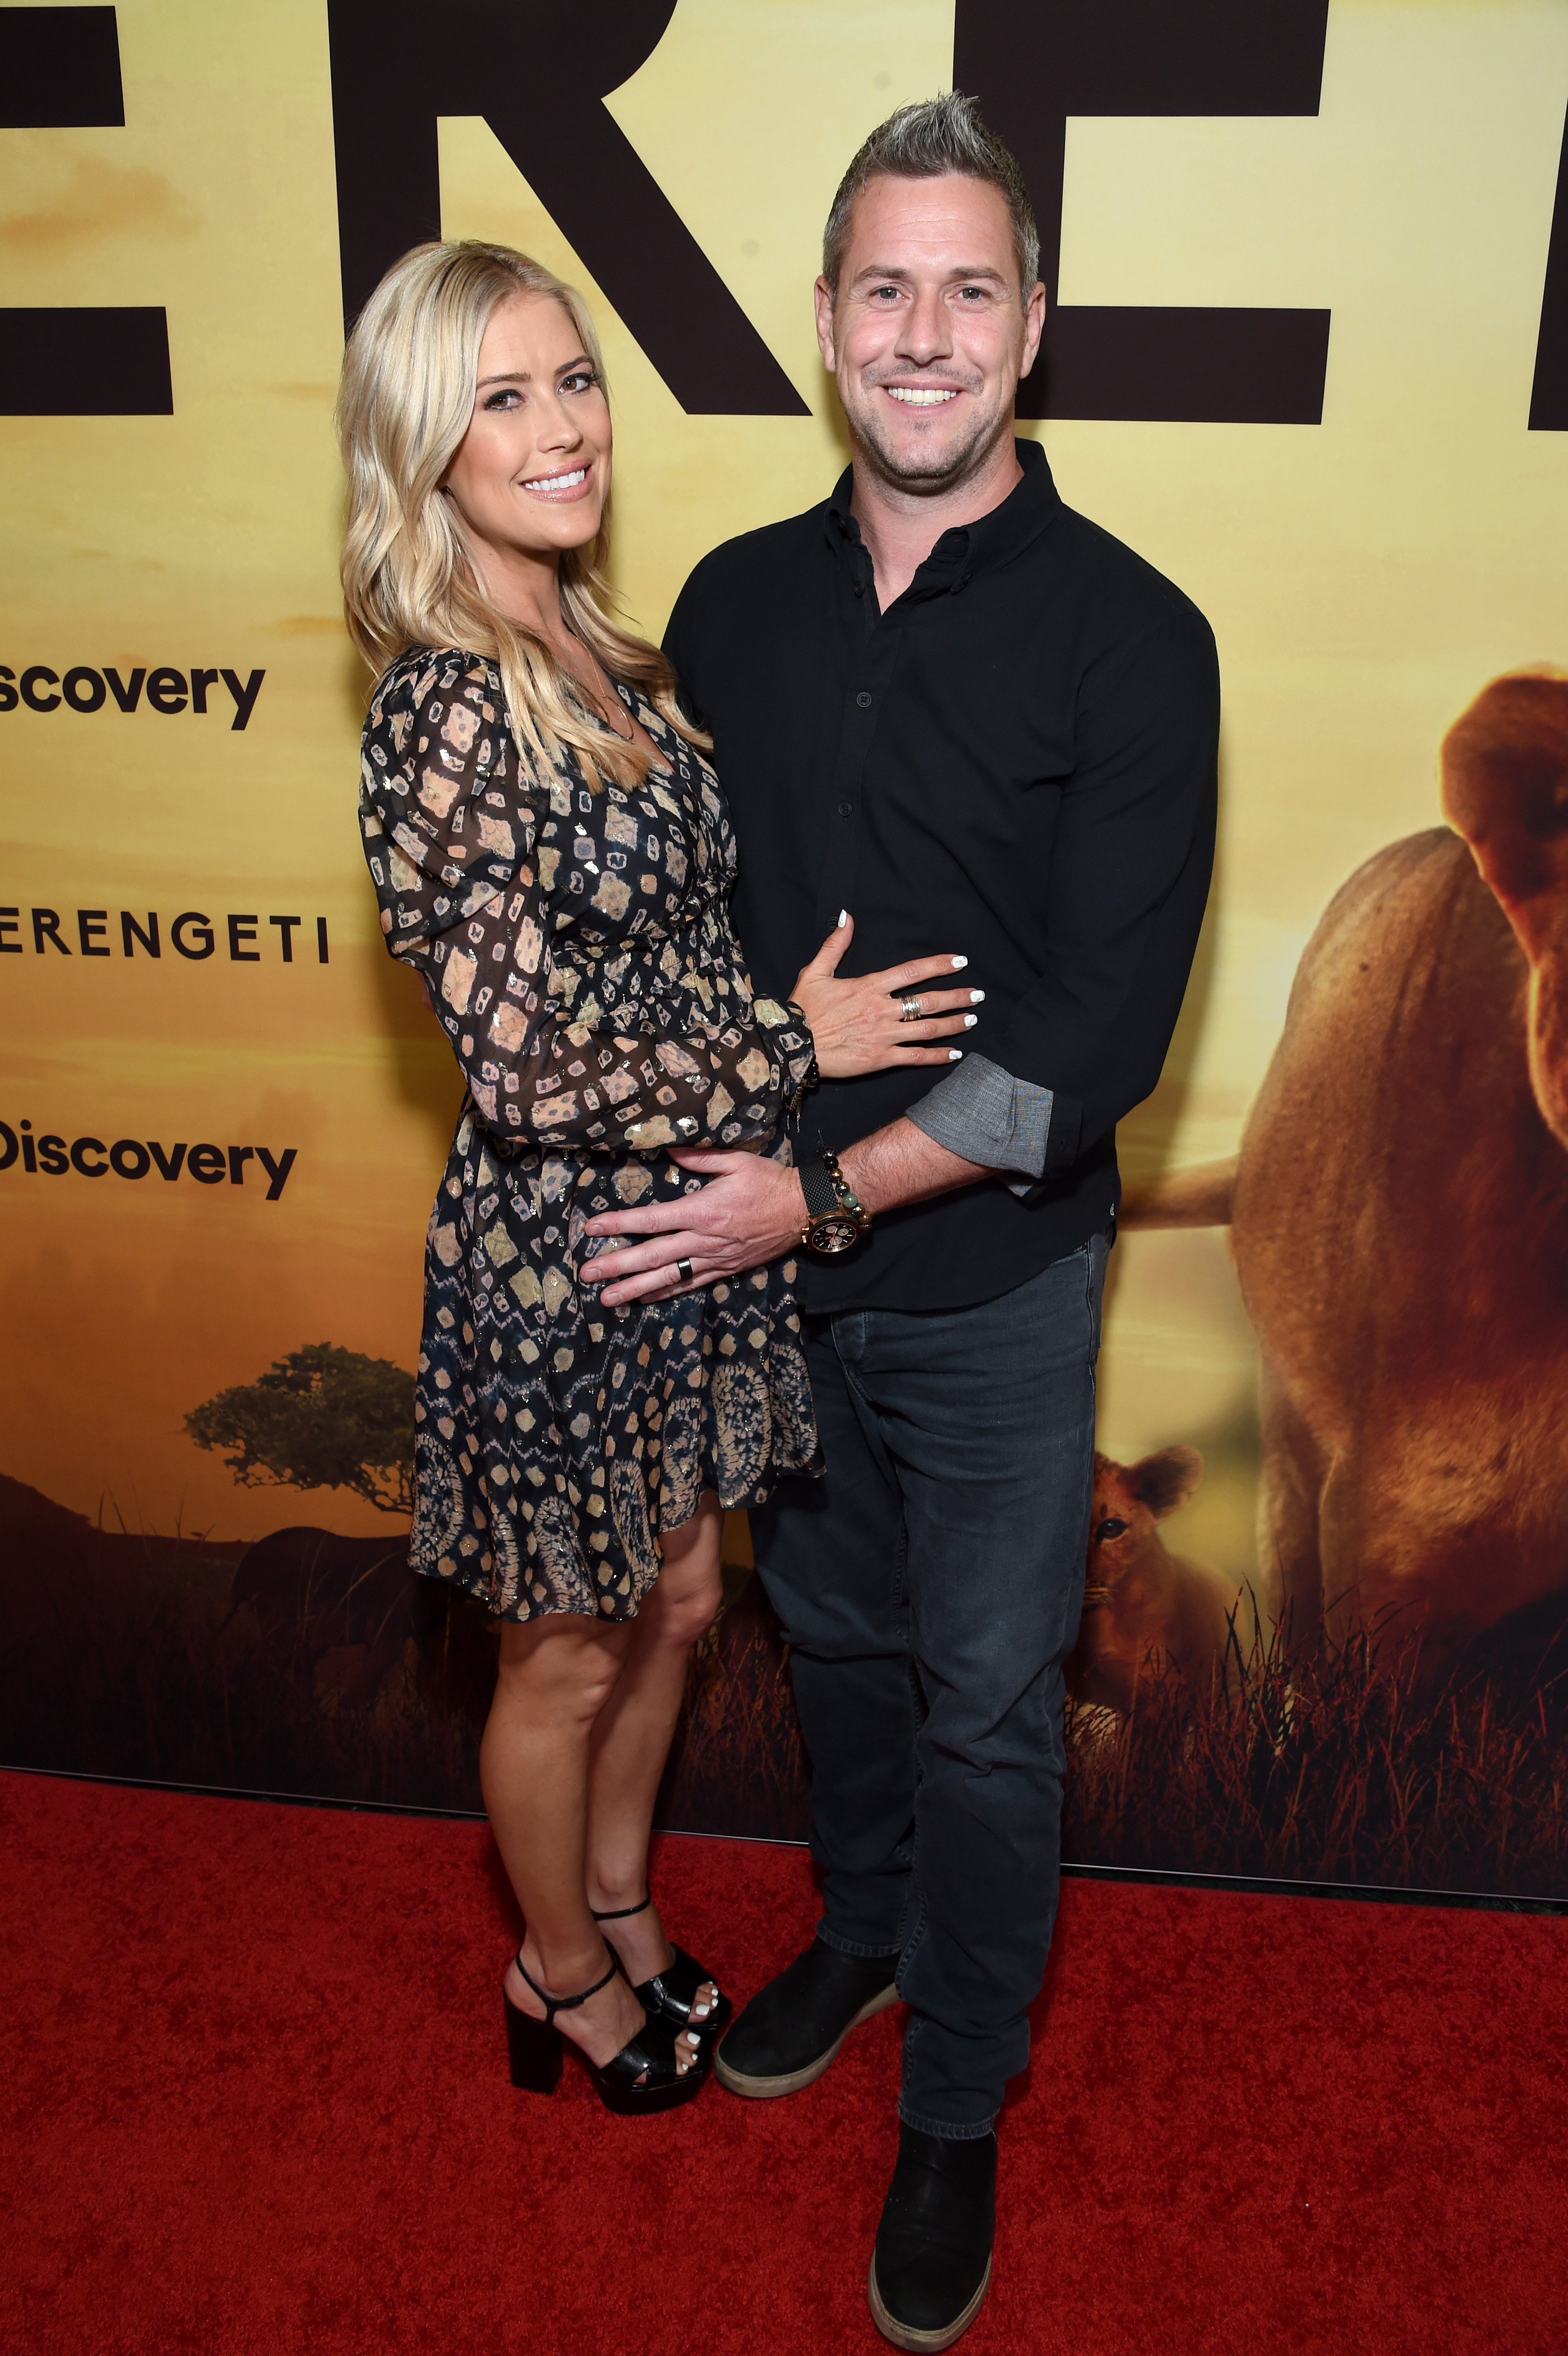 Christina Anstead and her husband, Ant at the Premiere of the movie, "Serengeti" | Photo: Getty Images